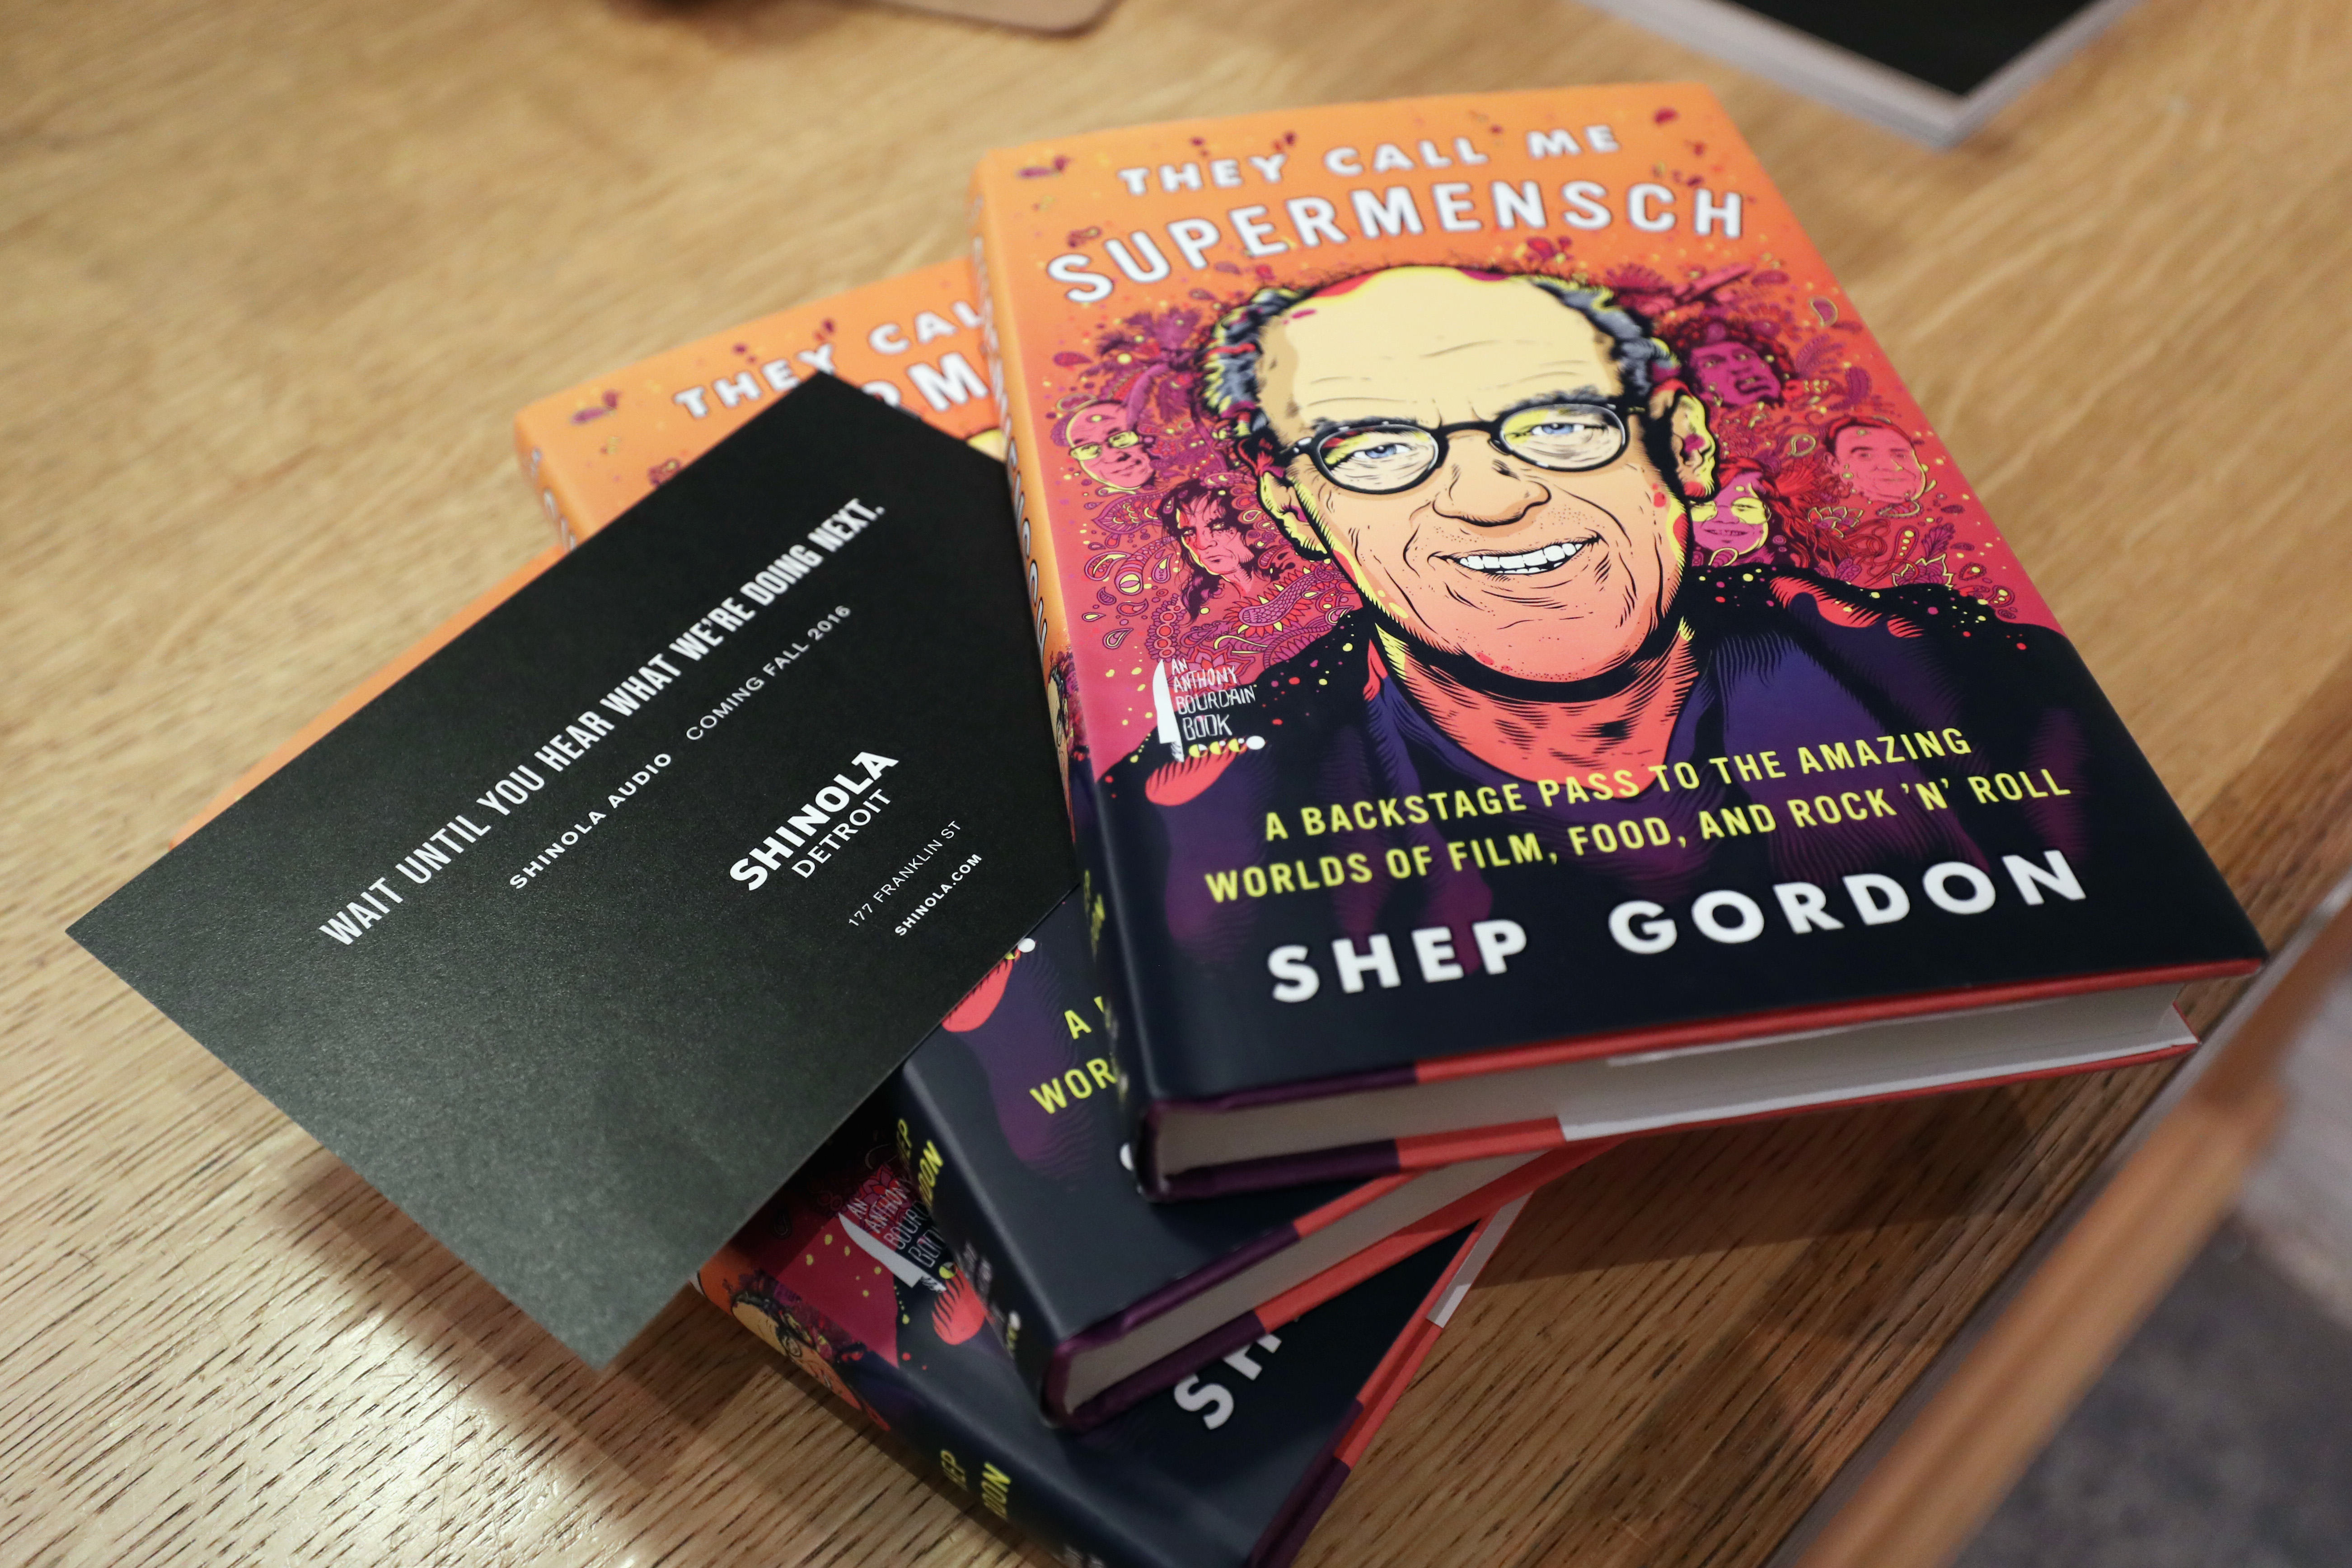 Shep Gordon Fetes First Book, They Call Me Supermensch: A Backstage Pass to the Amazing Worlds of Film, Food, and Rock ‘n’ Roll In NYC